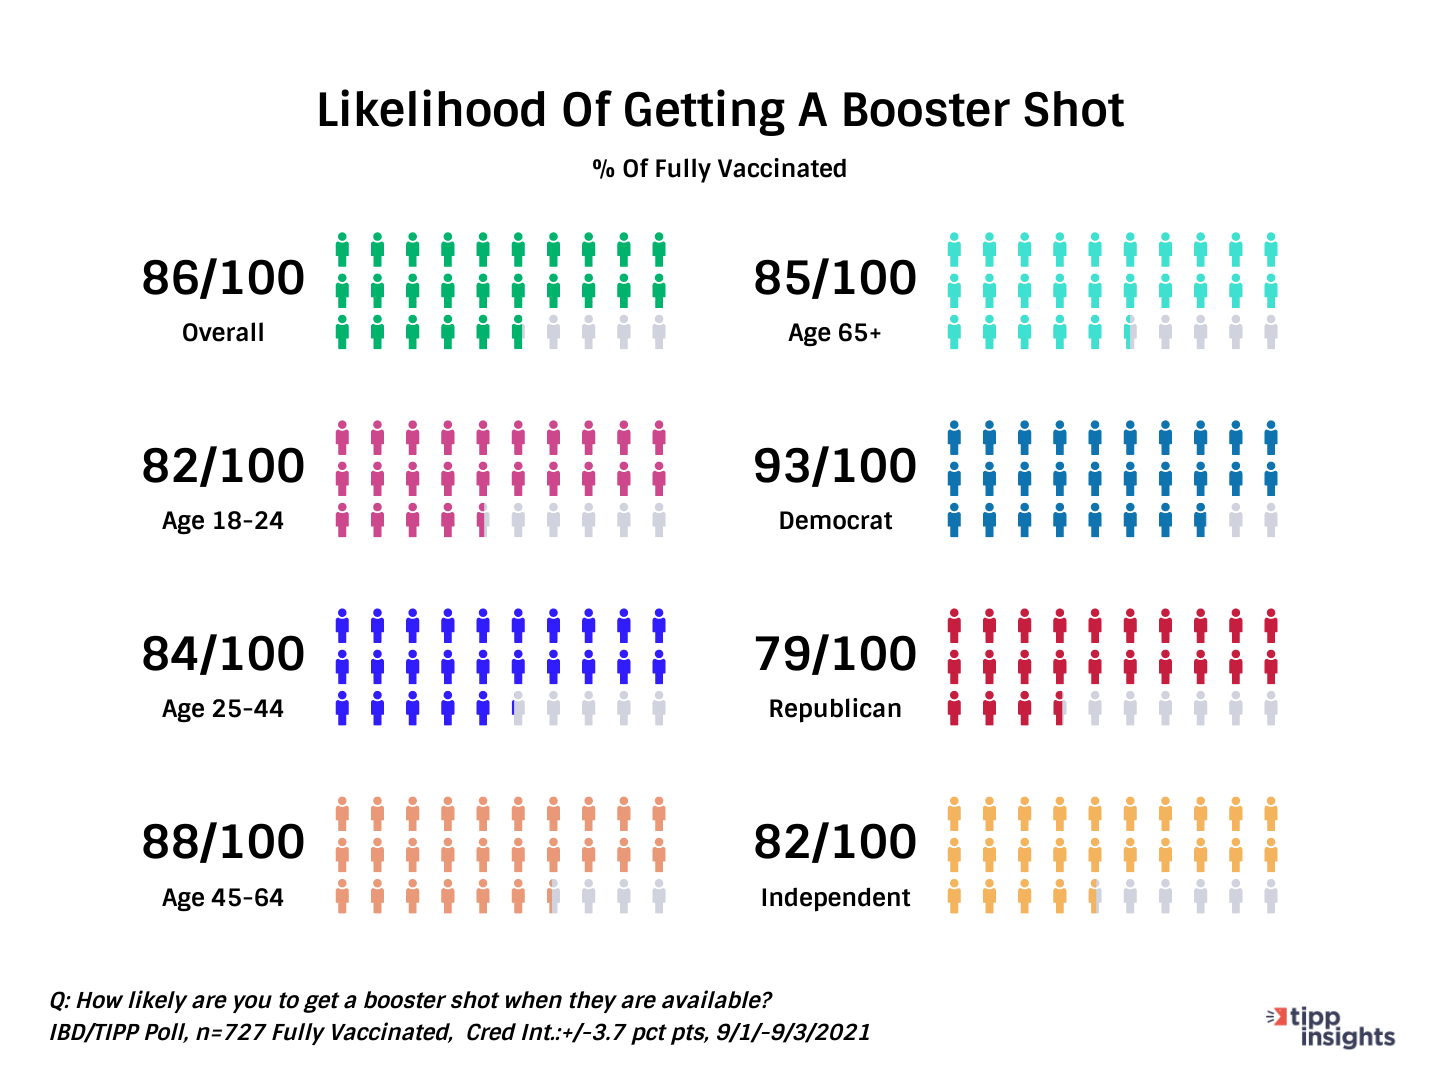 IBD/TIPP Poll Results, Americans and the likelihood of getting a COVID19 Vaccine Booster shot of By age and party